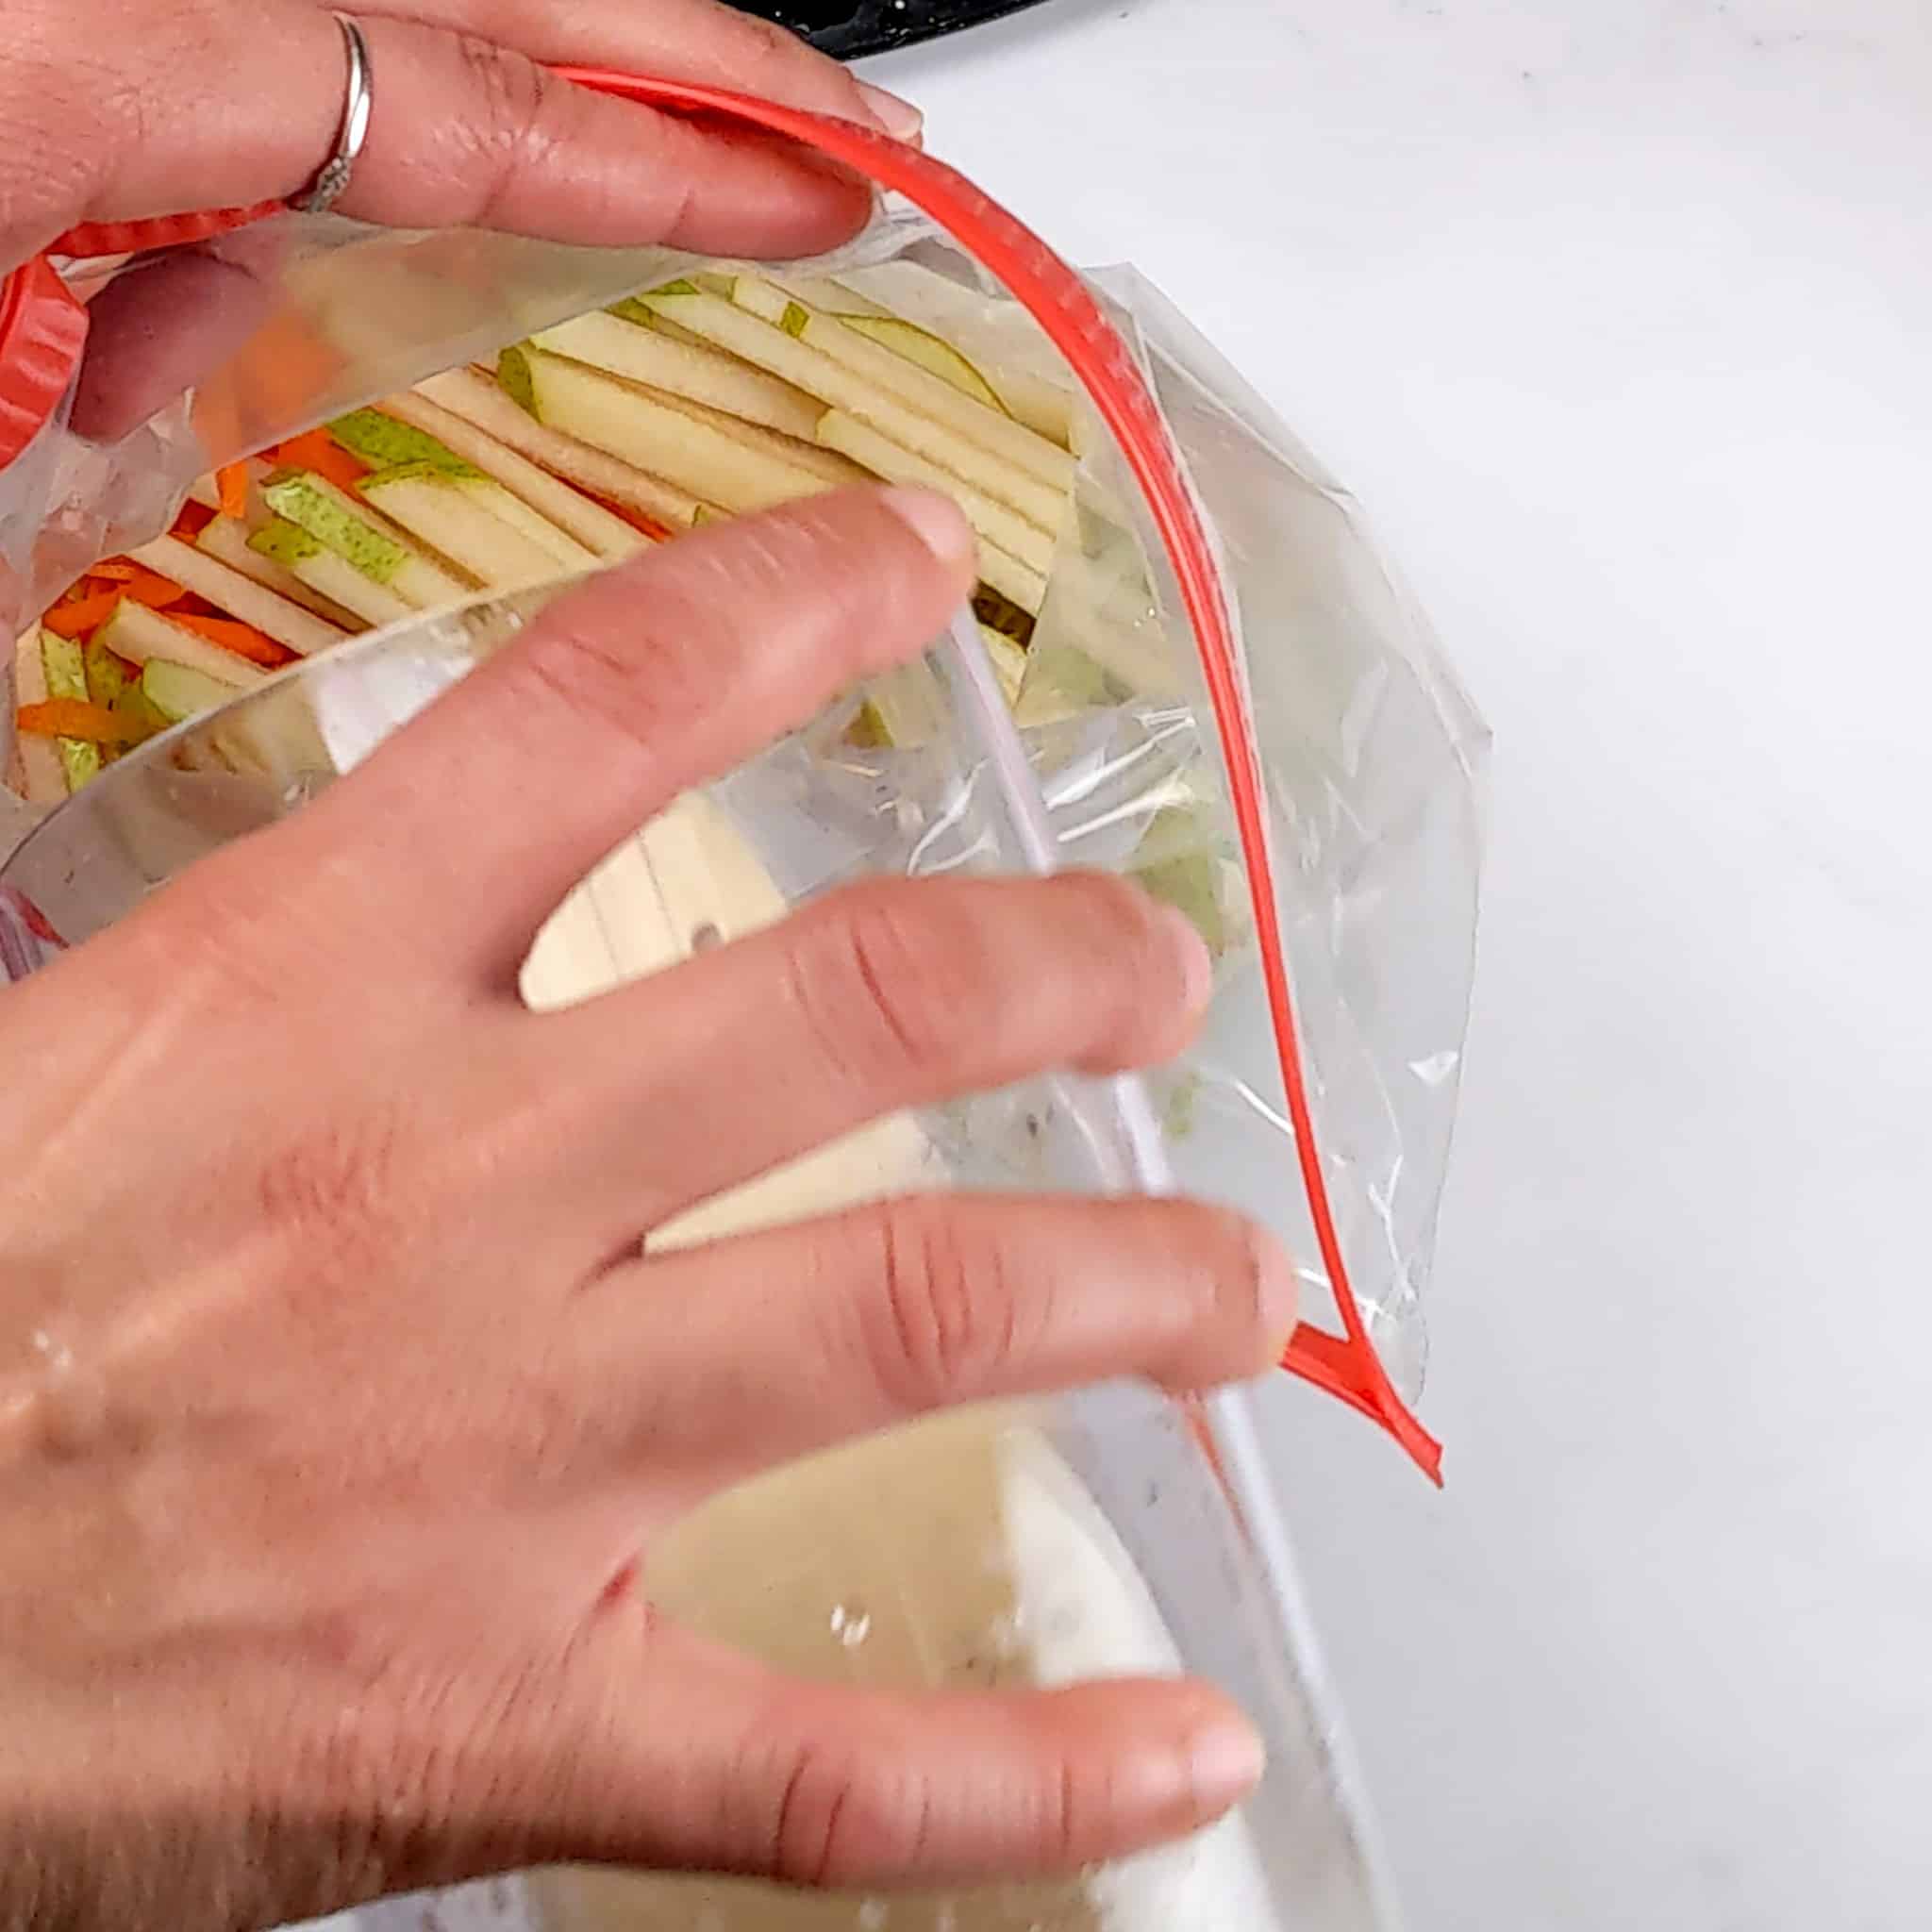 vinaigrette being pour into the a sealable bag of shredded vegetables and fruits for the Crispy Air Fryer Honey Jerk Rubbed Chicken Wings recipe